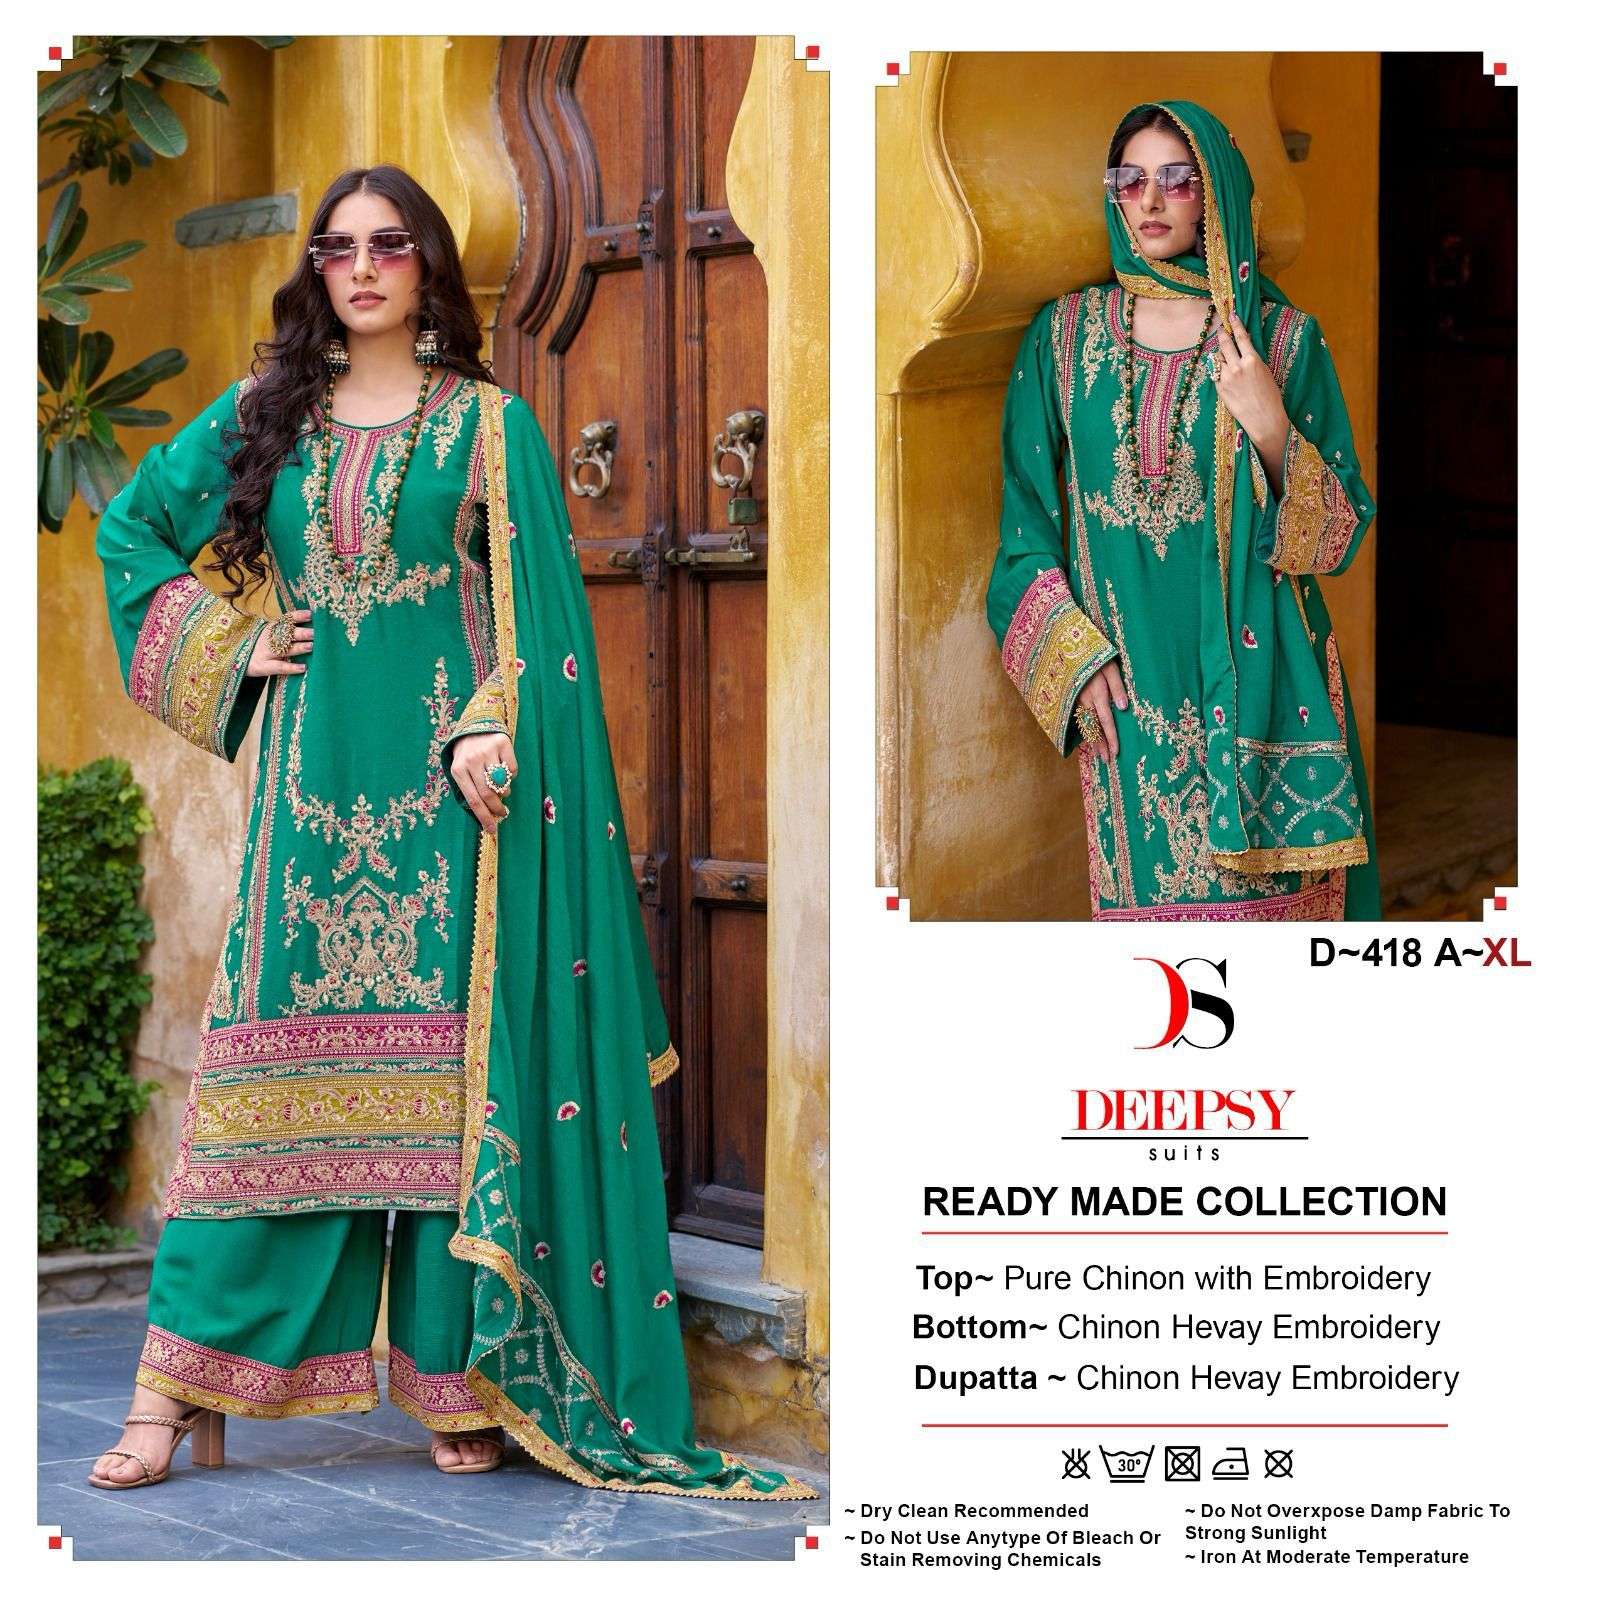 D-418 COLOURS BY DEEPSY SUITS HEAVY CHINON EMBROIDERY PAKISTANI DRESSES